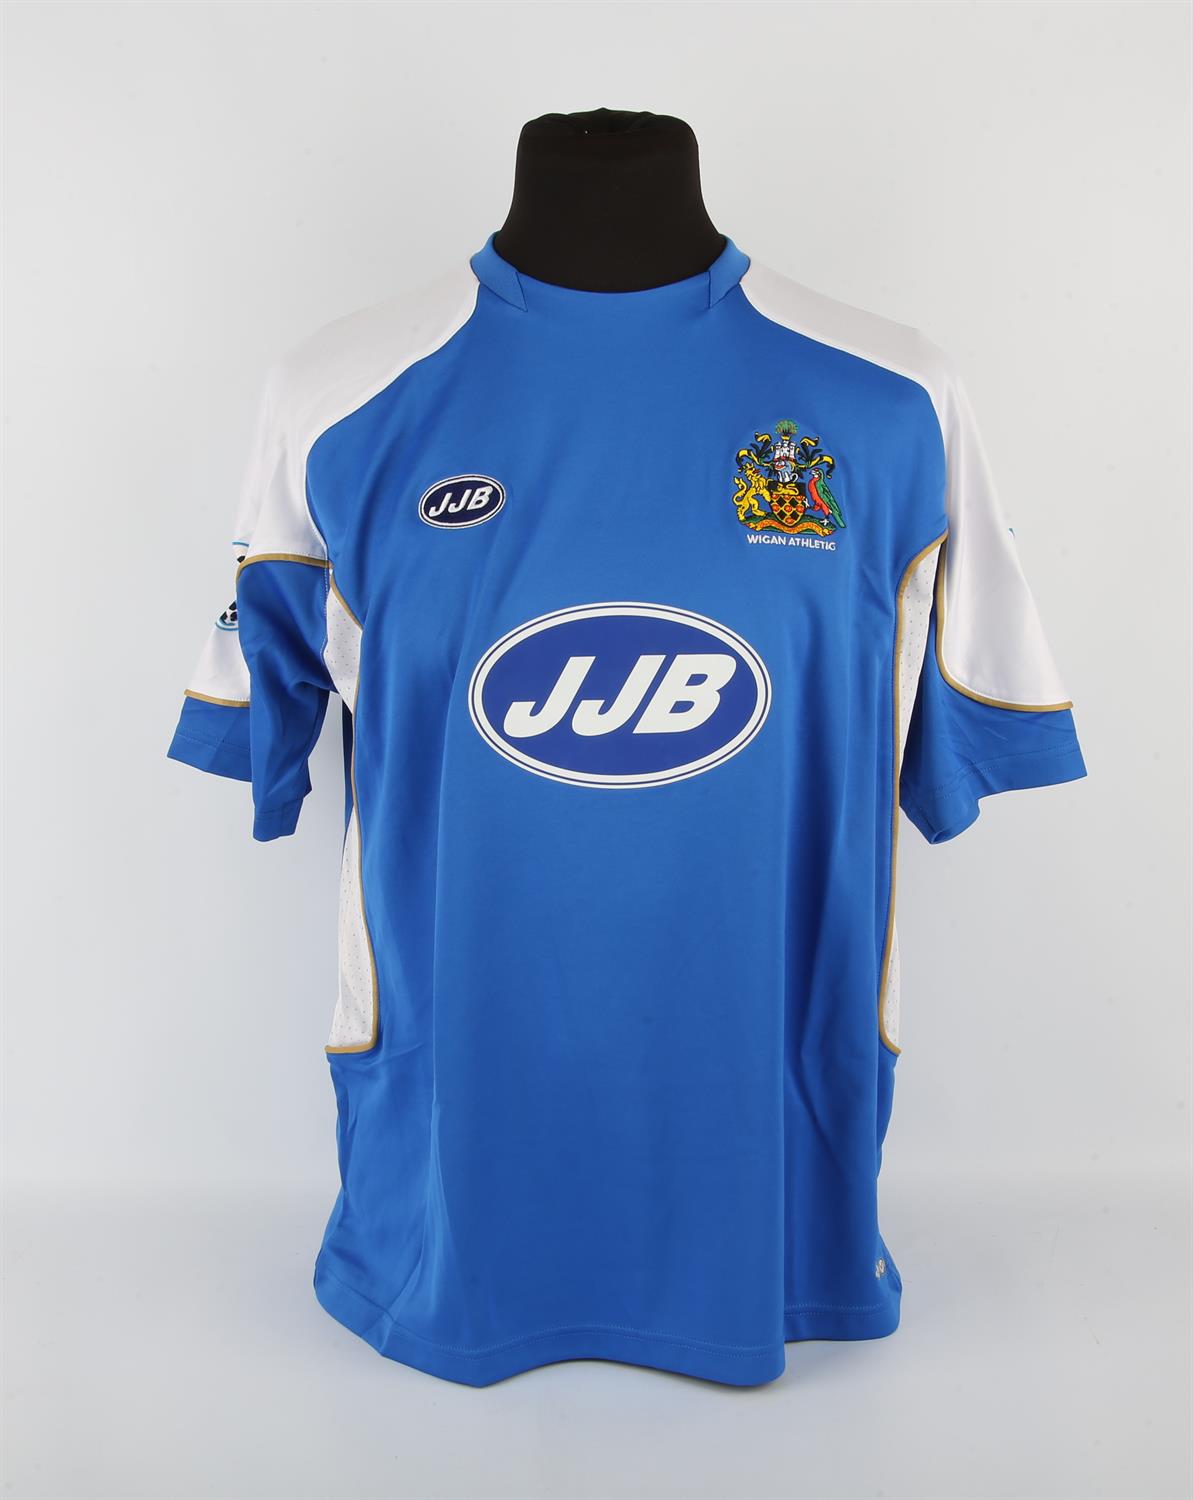 Wigan Athletic Football club, McCulloch (No.10) Season shirt from 2006-2007, S/S. - Image 2 of 2